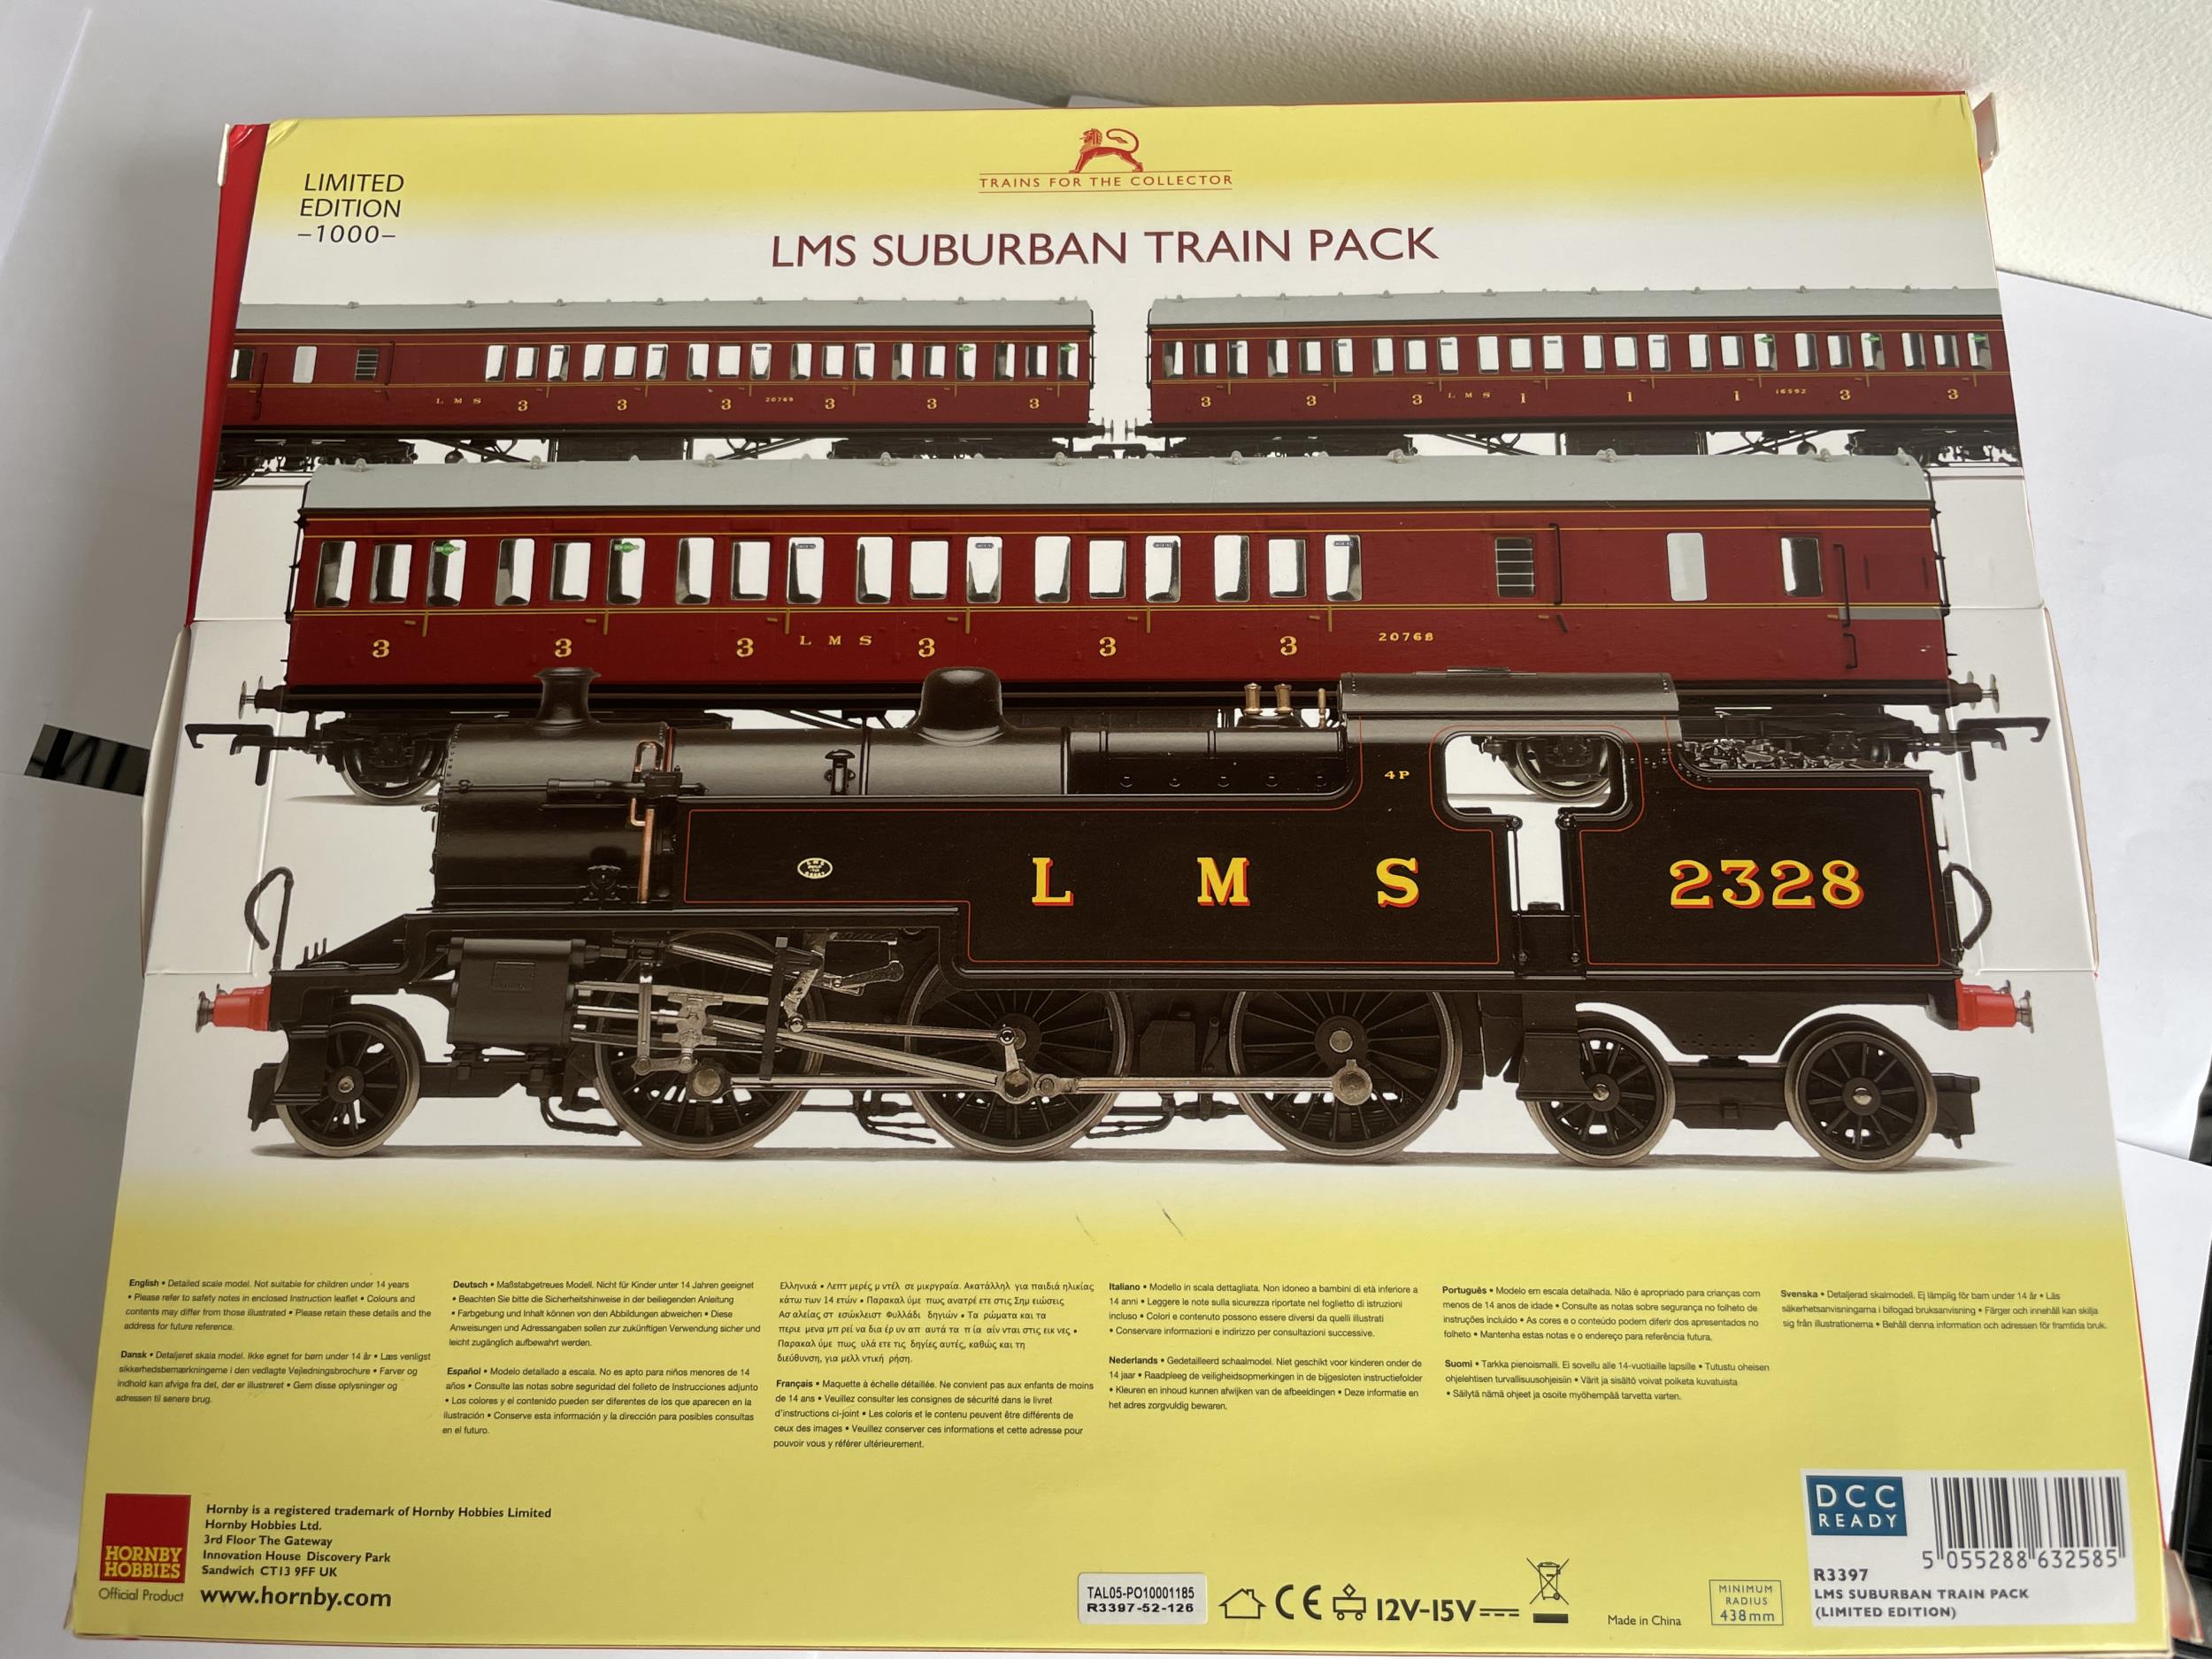 A HORNBY LIMITED EDITION OF 1000 AS NEW AND UNUSED BOXED LMS SUBURBAN TRAIN PACK 00 GAUGE - Image 3 of 3